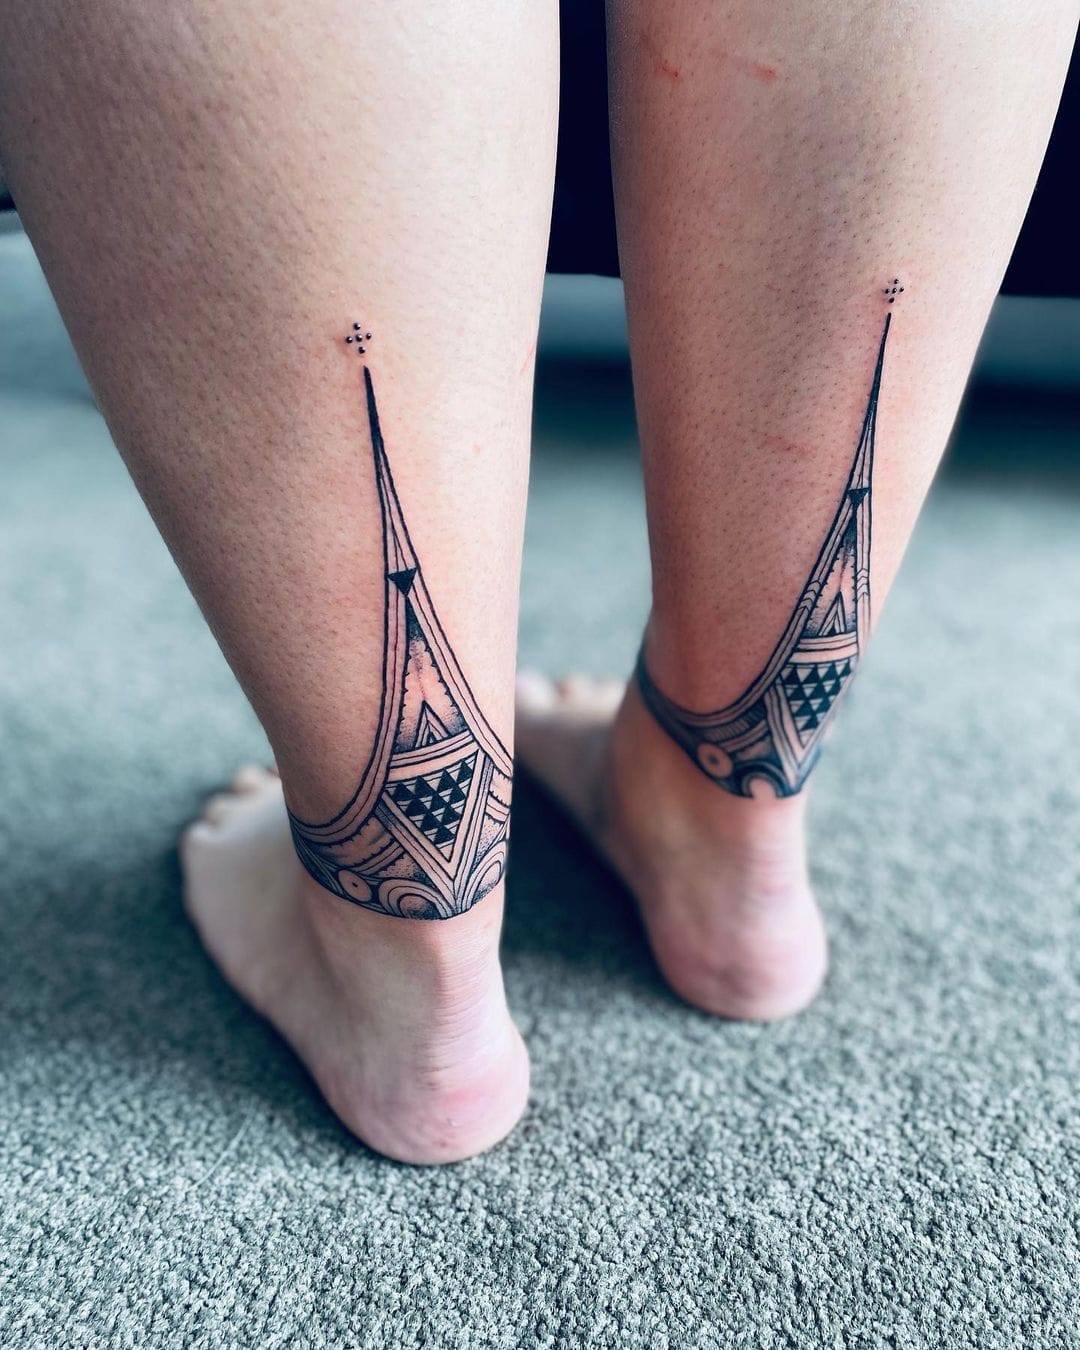 51 Cute Ankle Tattoos for Women - Ankle Tattoo Ideas | Fashionisers© | Ankle  tattoos for women, Cute ankle tattoos, Tattoos for women